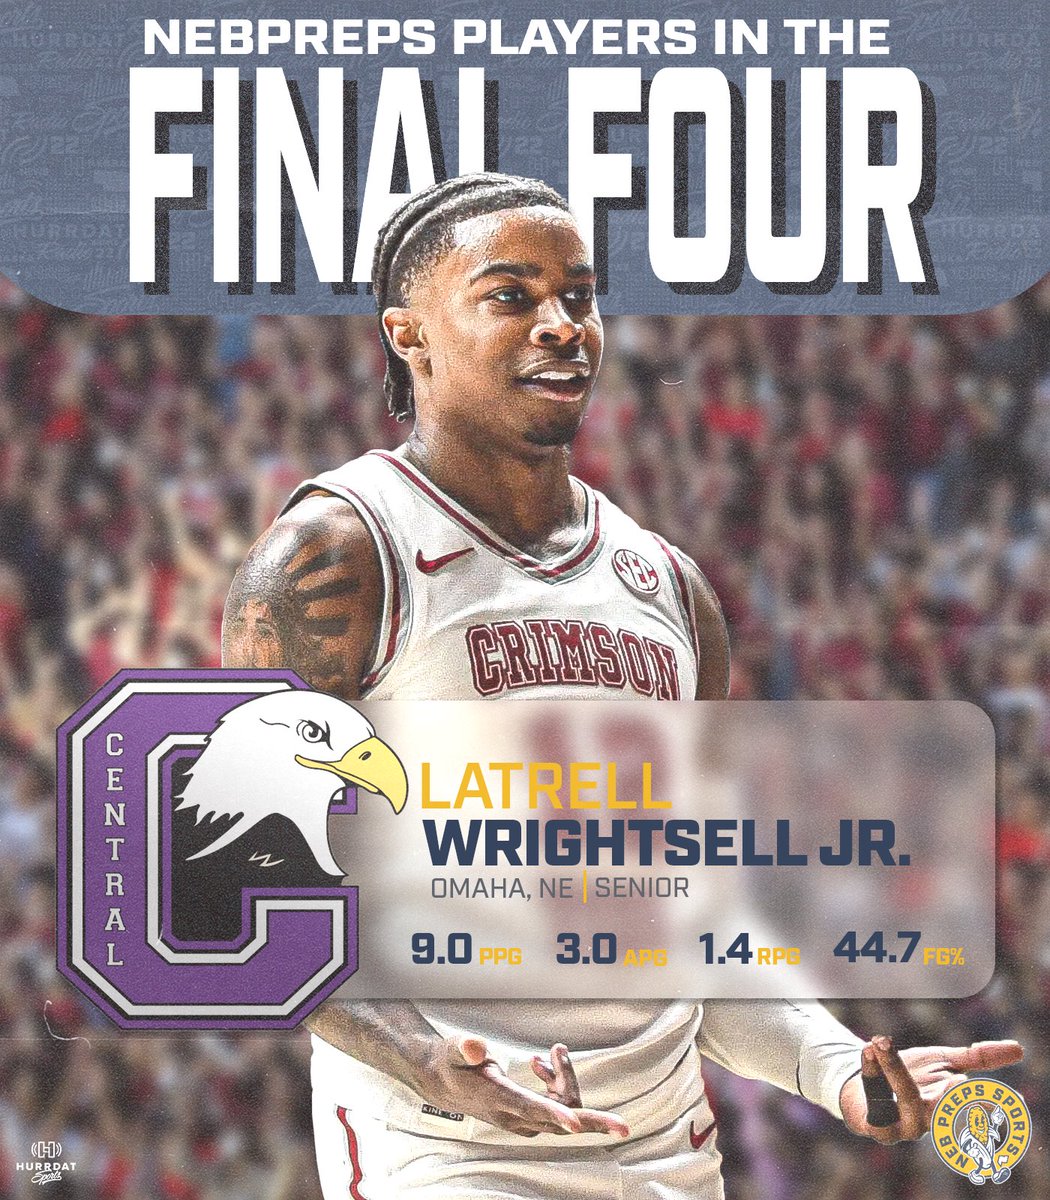 Making Omaha proud! Omaha Central alum and current Alabama guard @LJWrightsell will make his Final Four debut tonight against UConn. #NebPreps | @OPSCHSBBB